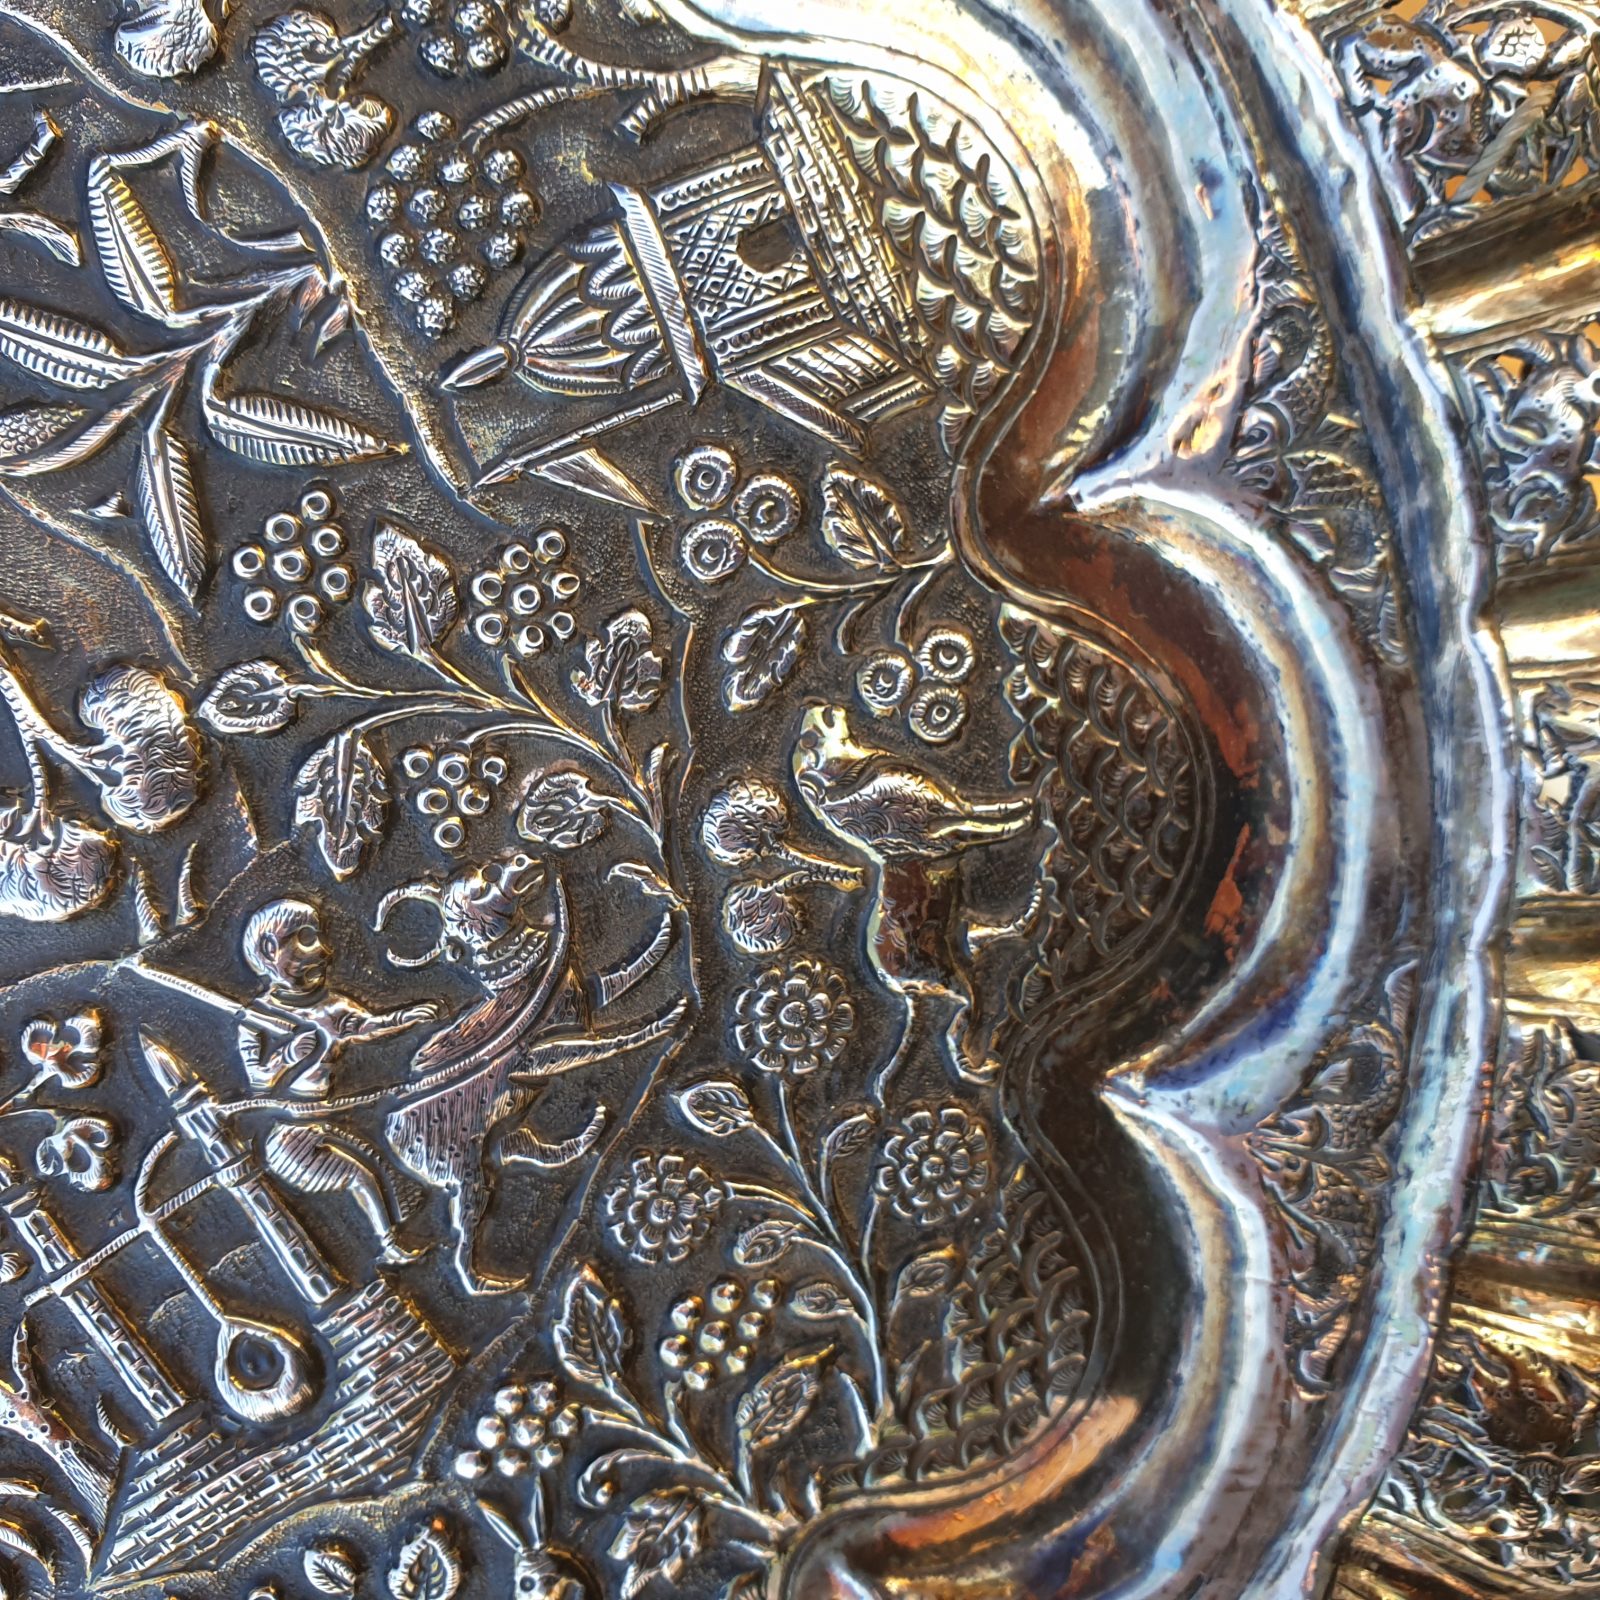 A close-up image of an embossed and  highly decorated Indian antique silver dish.